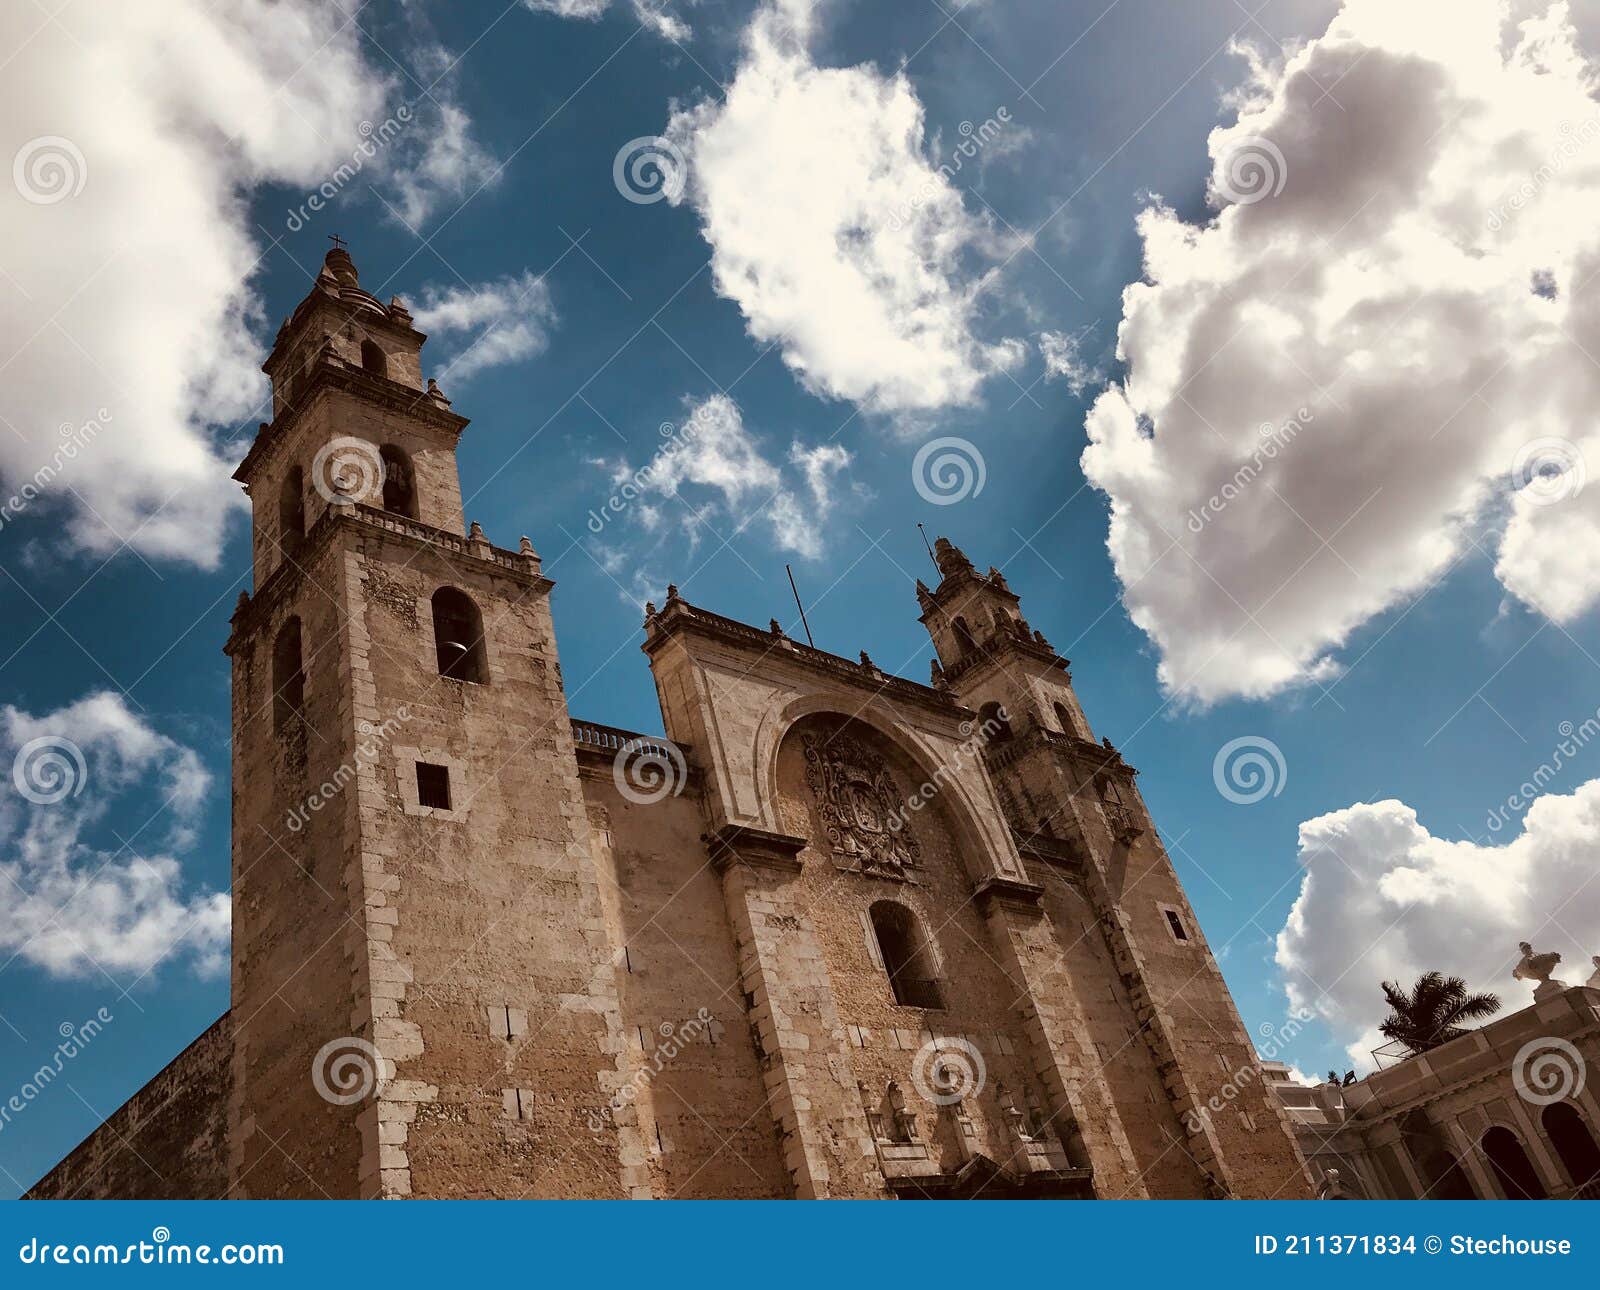 wondrous clouds over the center of merida, mexico, the jewel of the yucatan